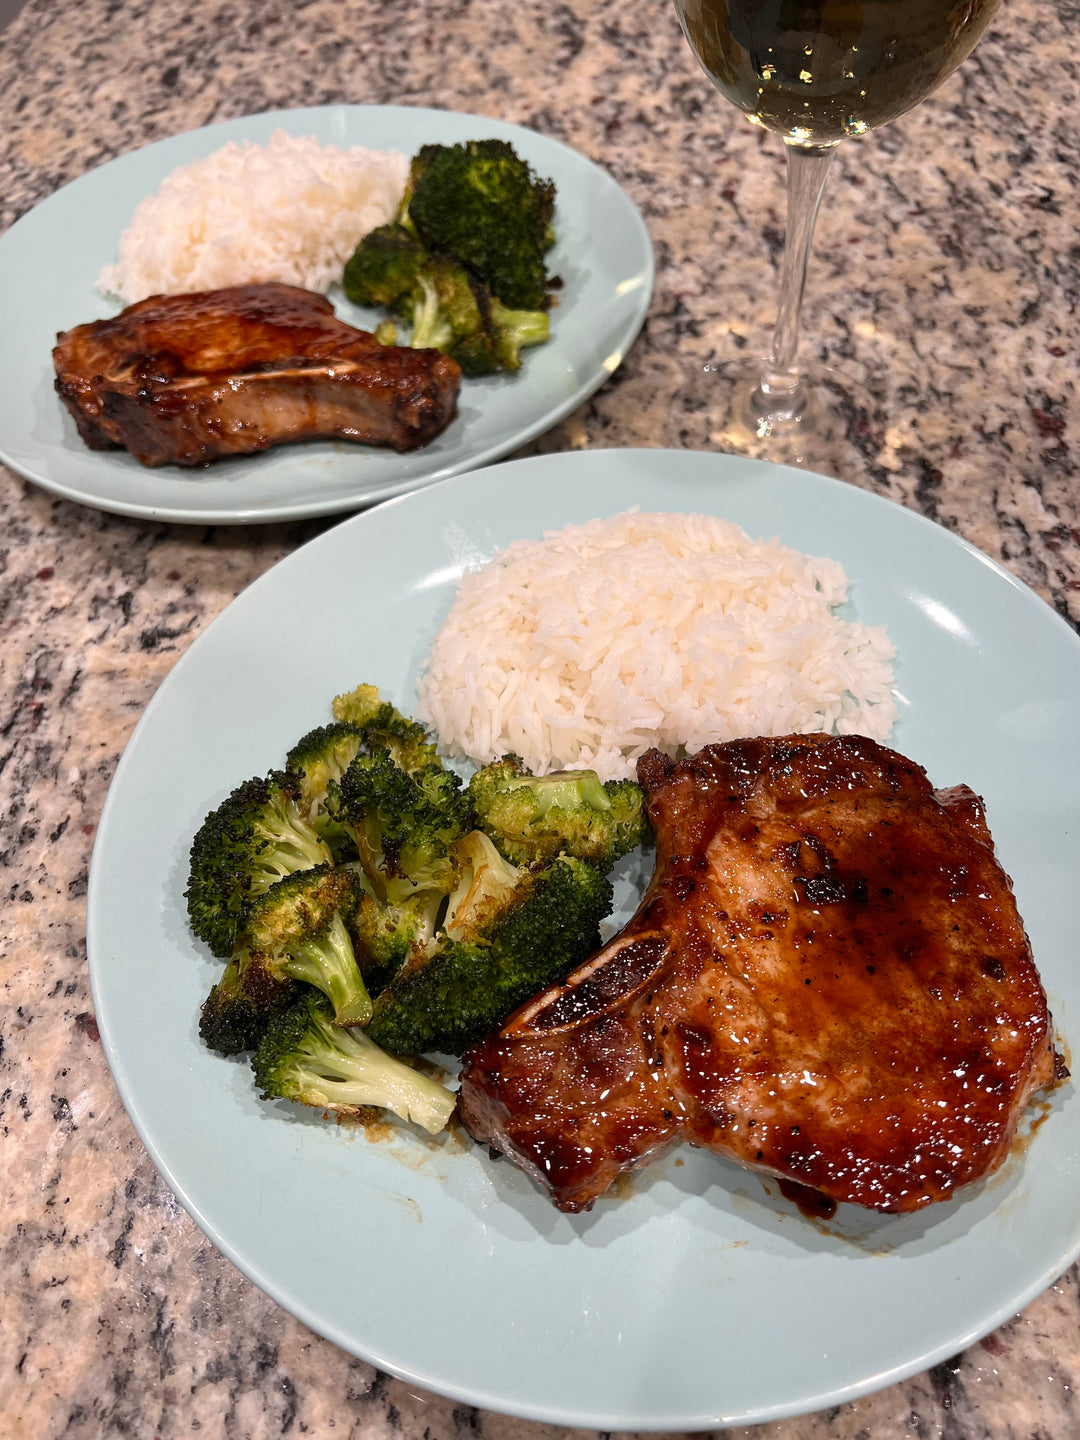 Glazed Pork Chops with Hot Pepper Jelly